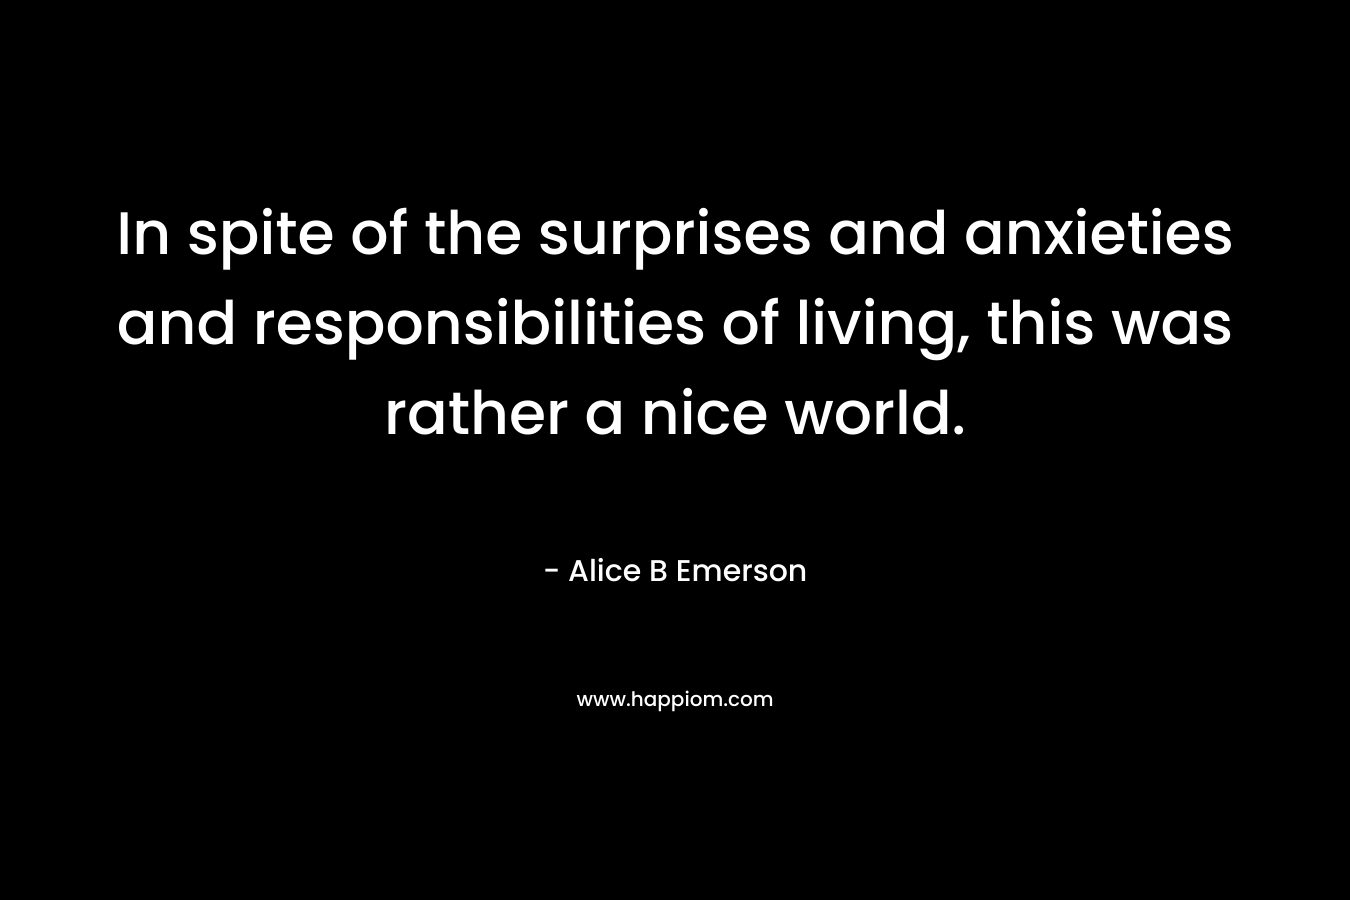 In spite of the surprises and anxieties and responsibilities of living, this was rather a nice world. – Alice B Emerson